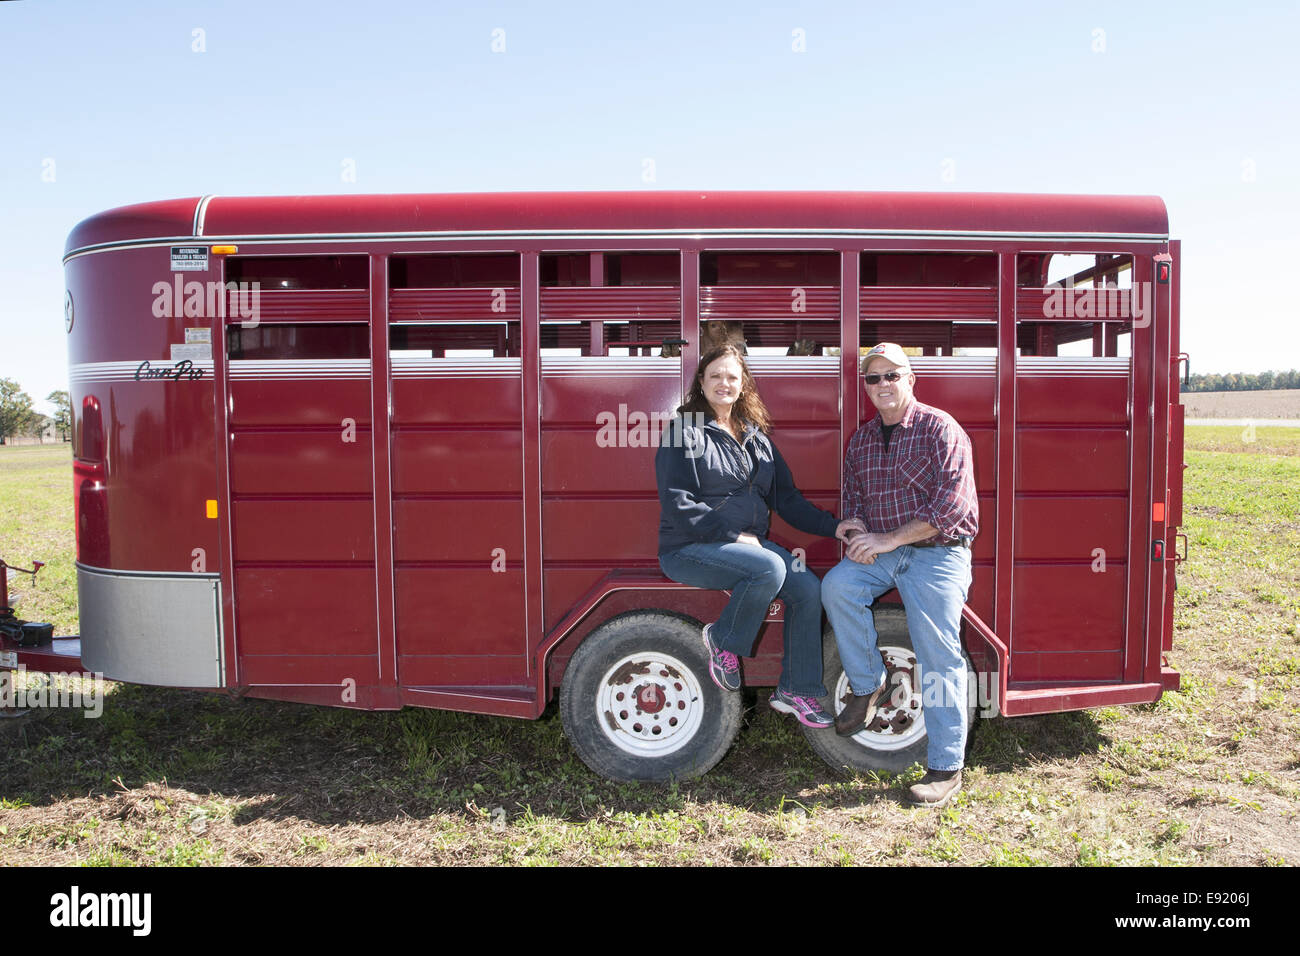 50-60 man and woman sitting on the wheel well cover of a red stock trailer. Stock Photo